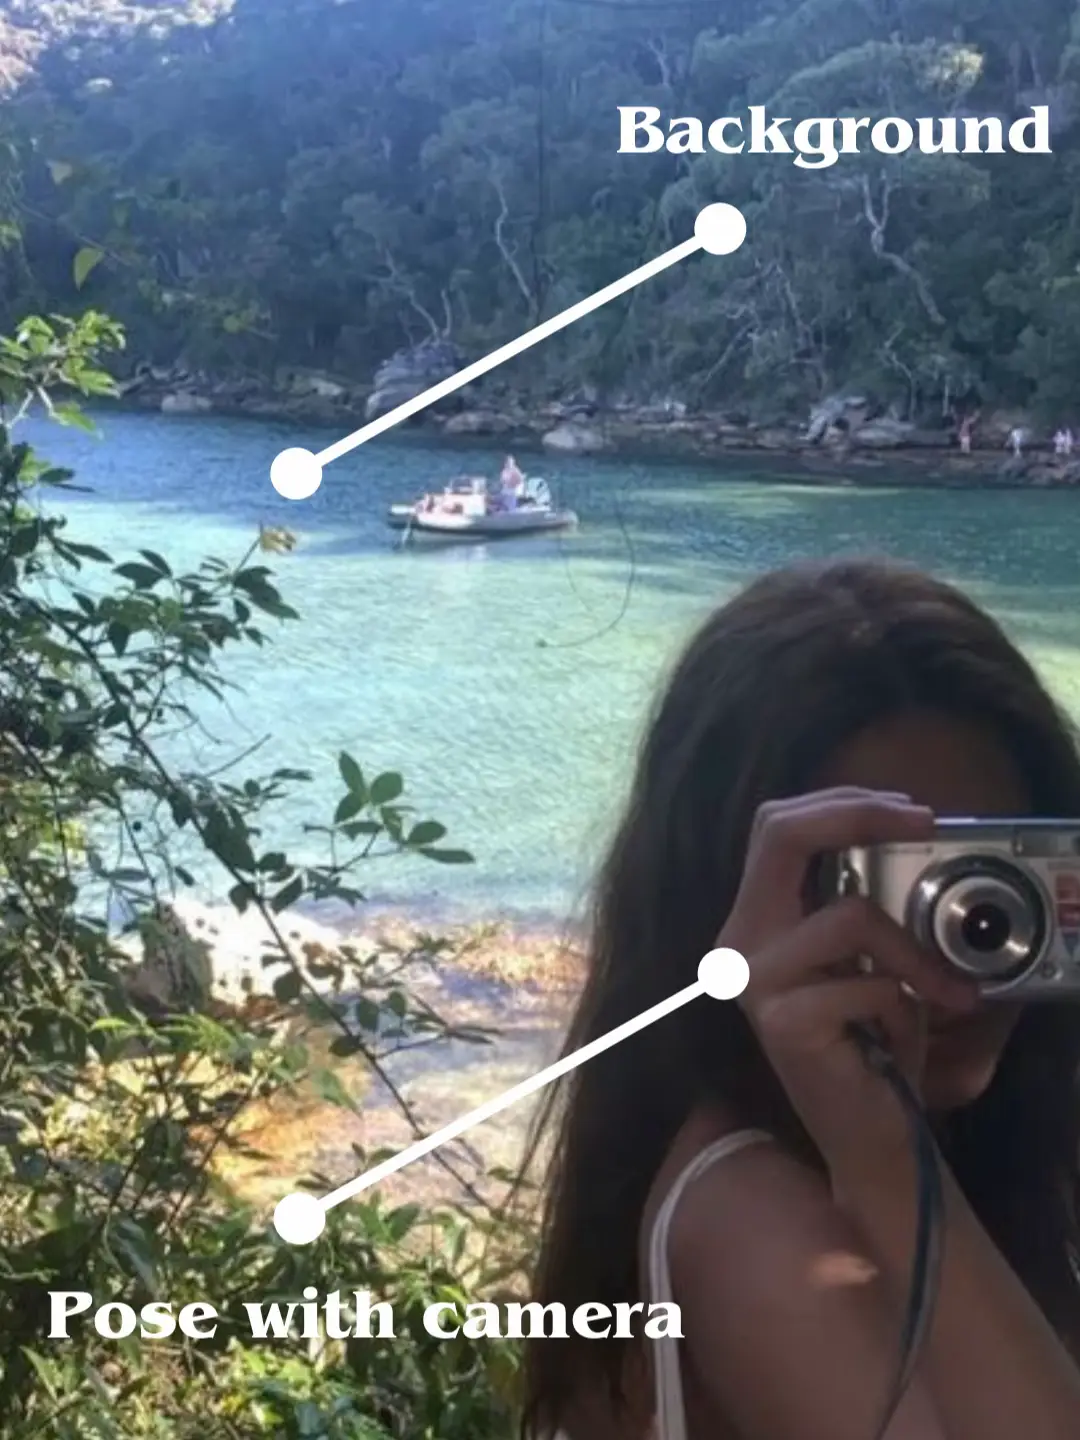  A woman is taking a picture of a lake.